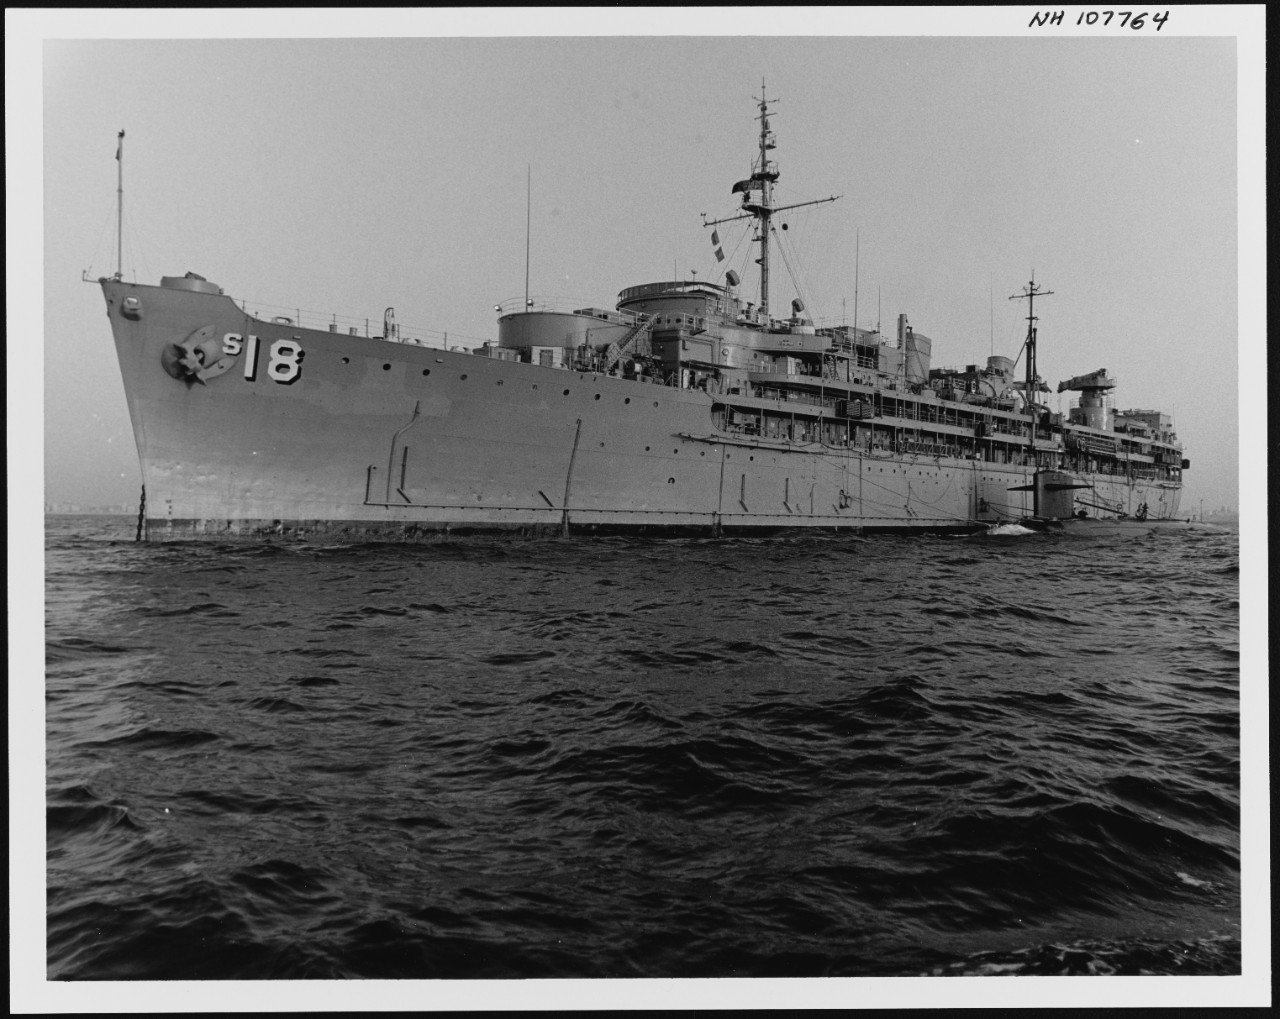 Photo #: NH 107764  USS Orion